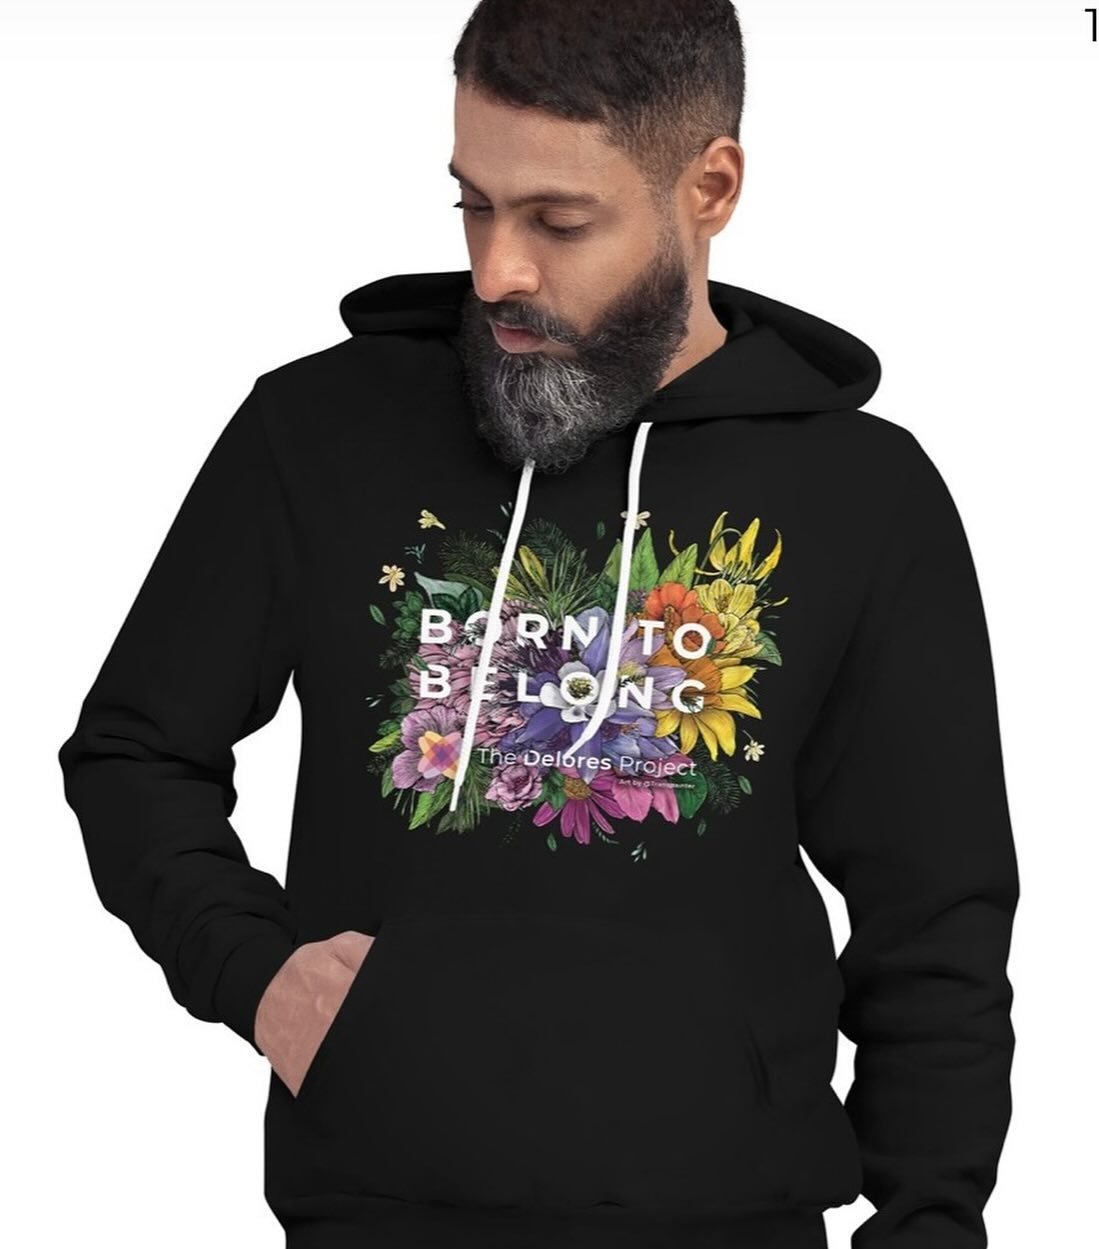 Our Born to Belong merch store is live on our website! All products feature beautiful custom artwork by @transpainter Rae Senarighi. With this design we declare to the world that all people, housed or unhoused, belong. 100% of proceeds help women and